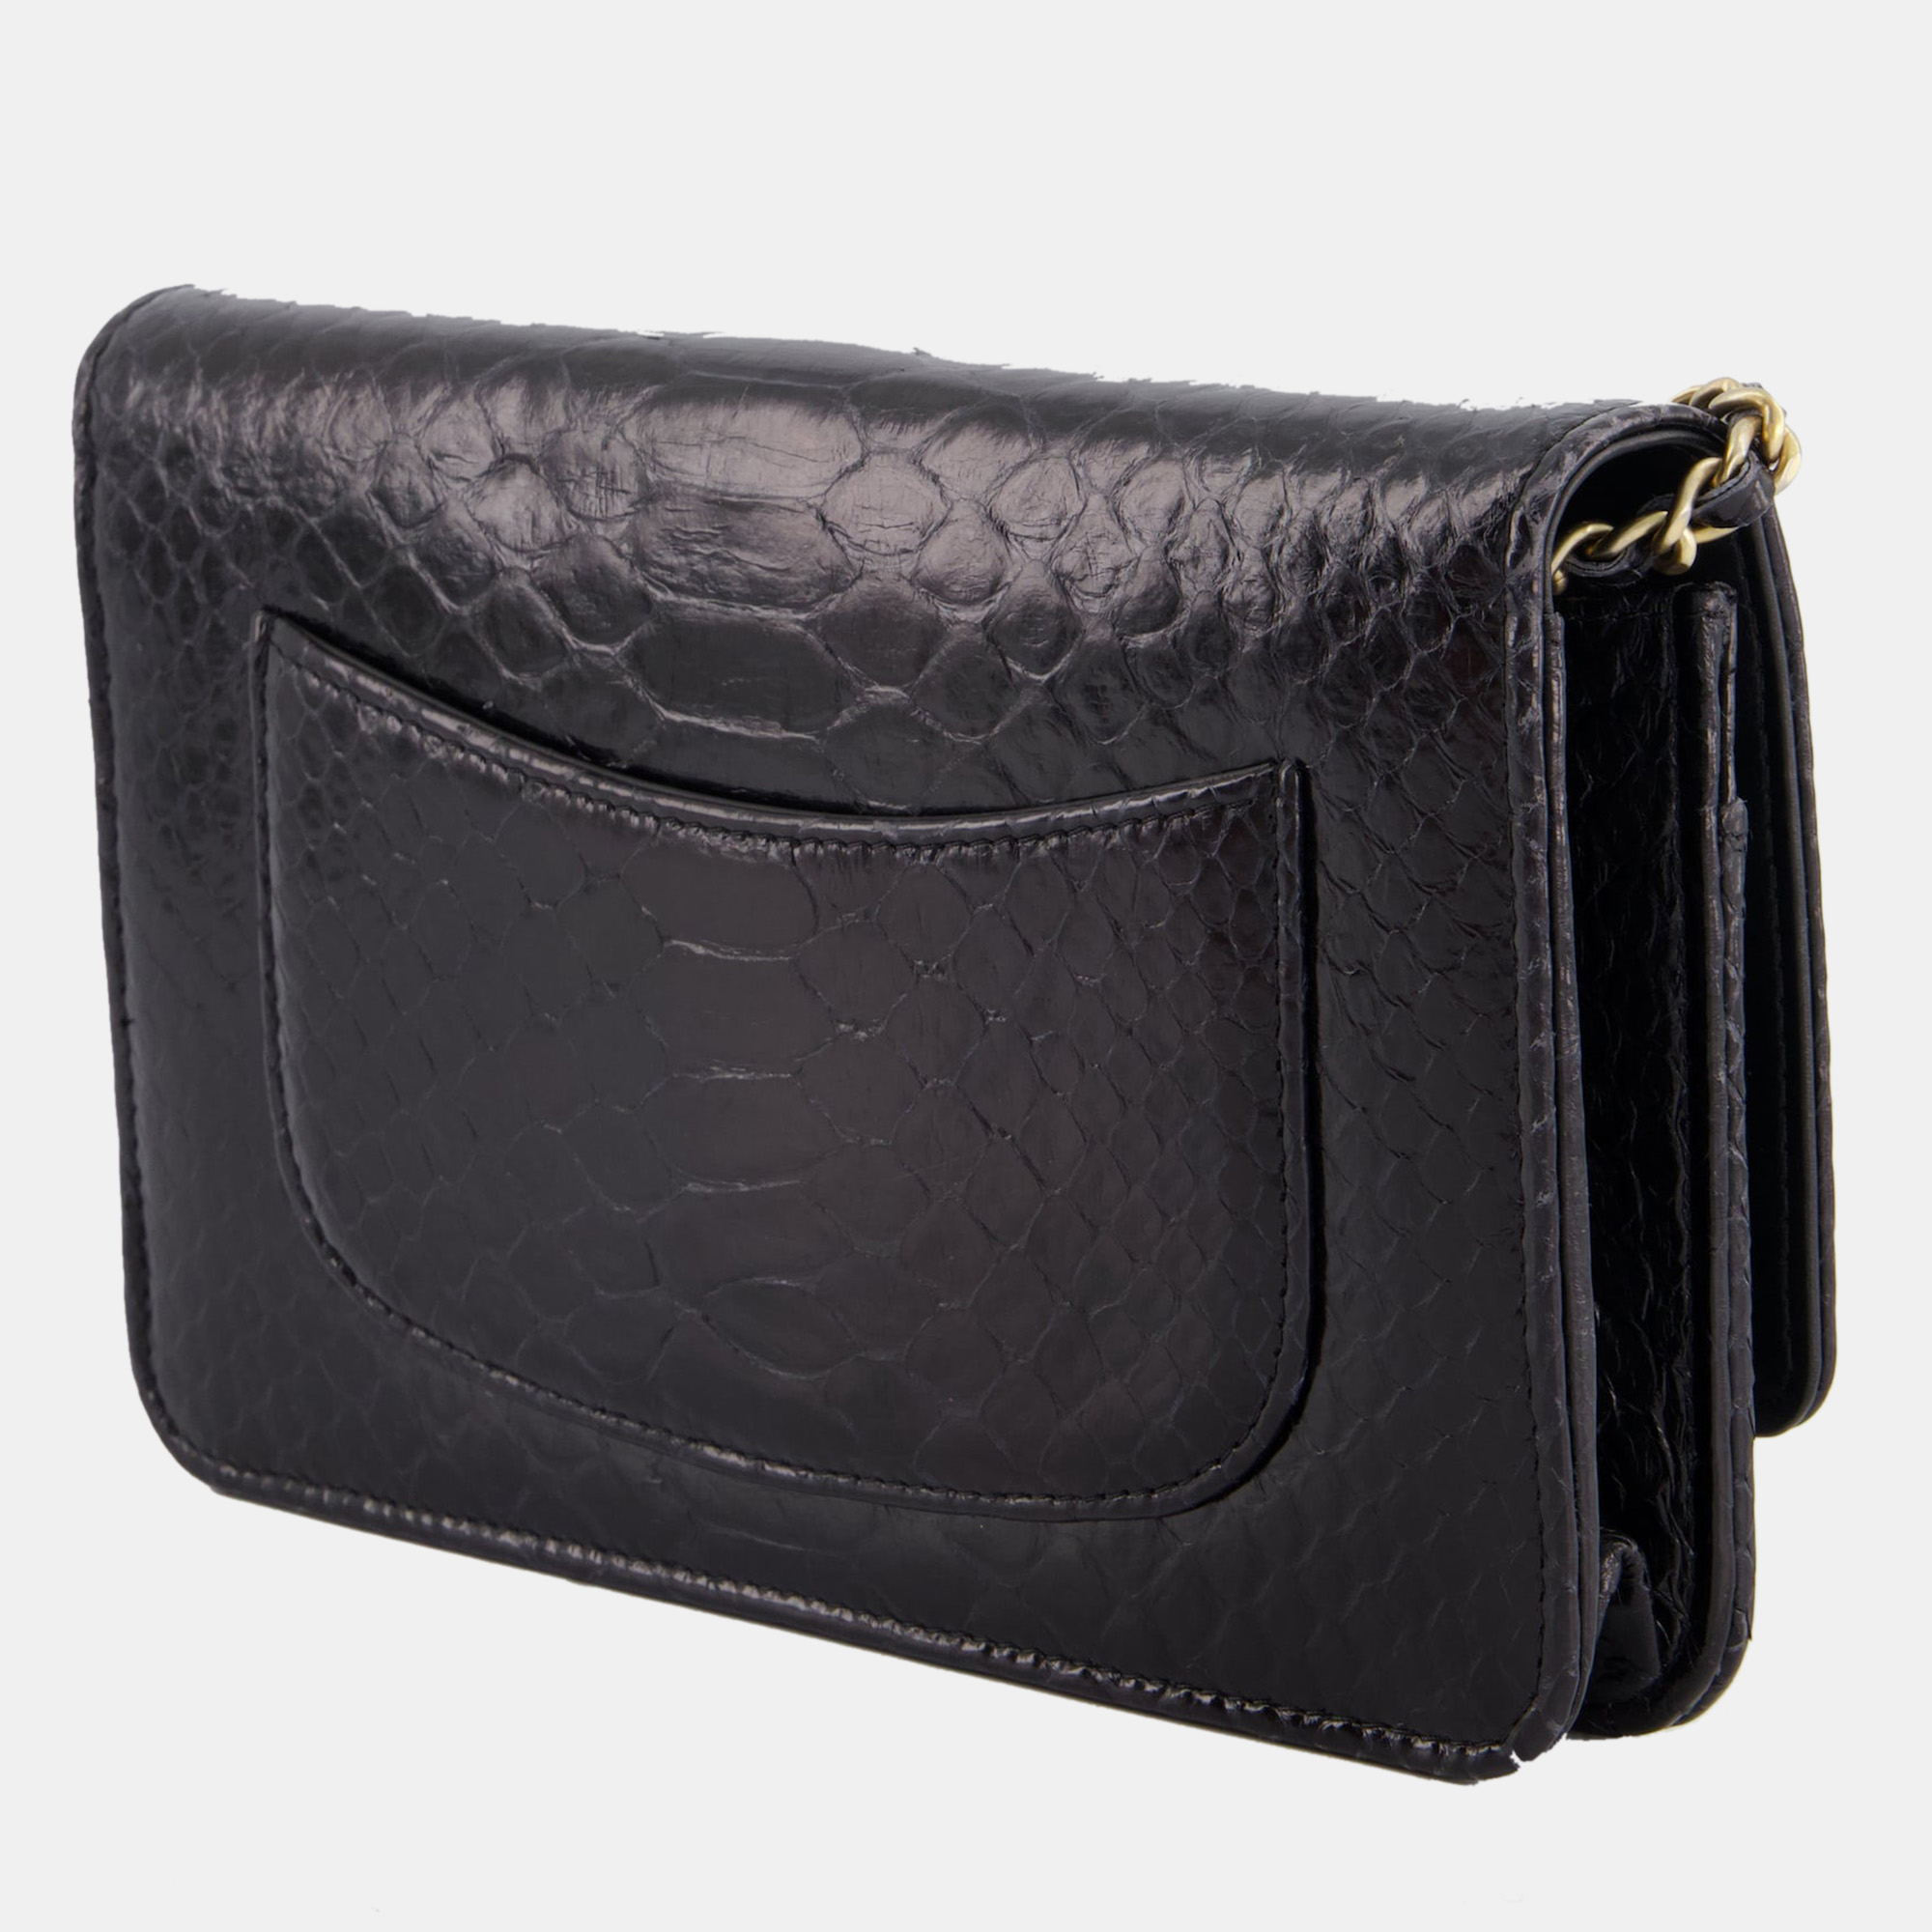 Chanel Black Python Wallet On Chain Bag With Brushed Gold Hardware